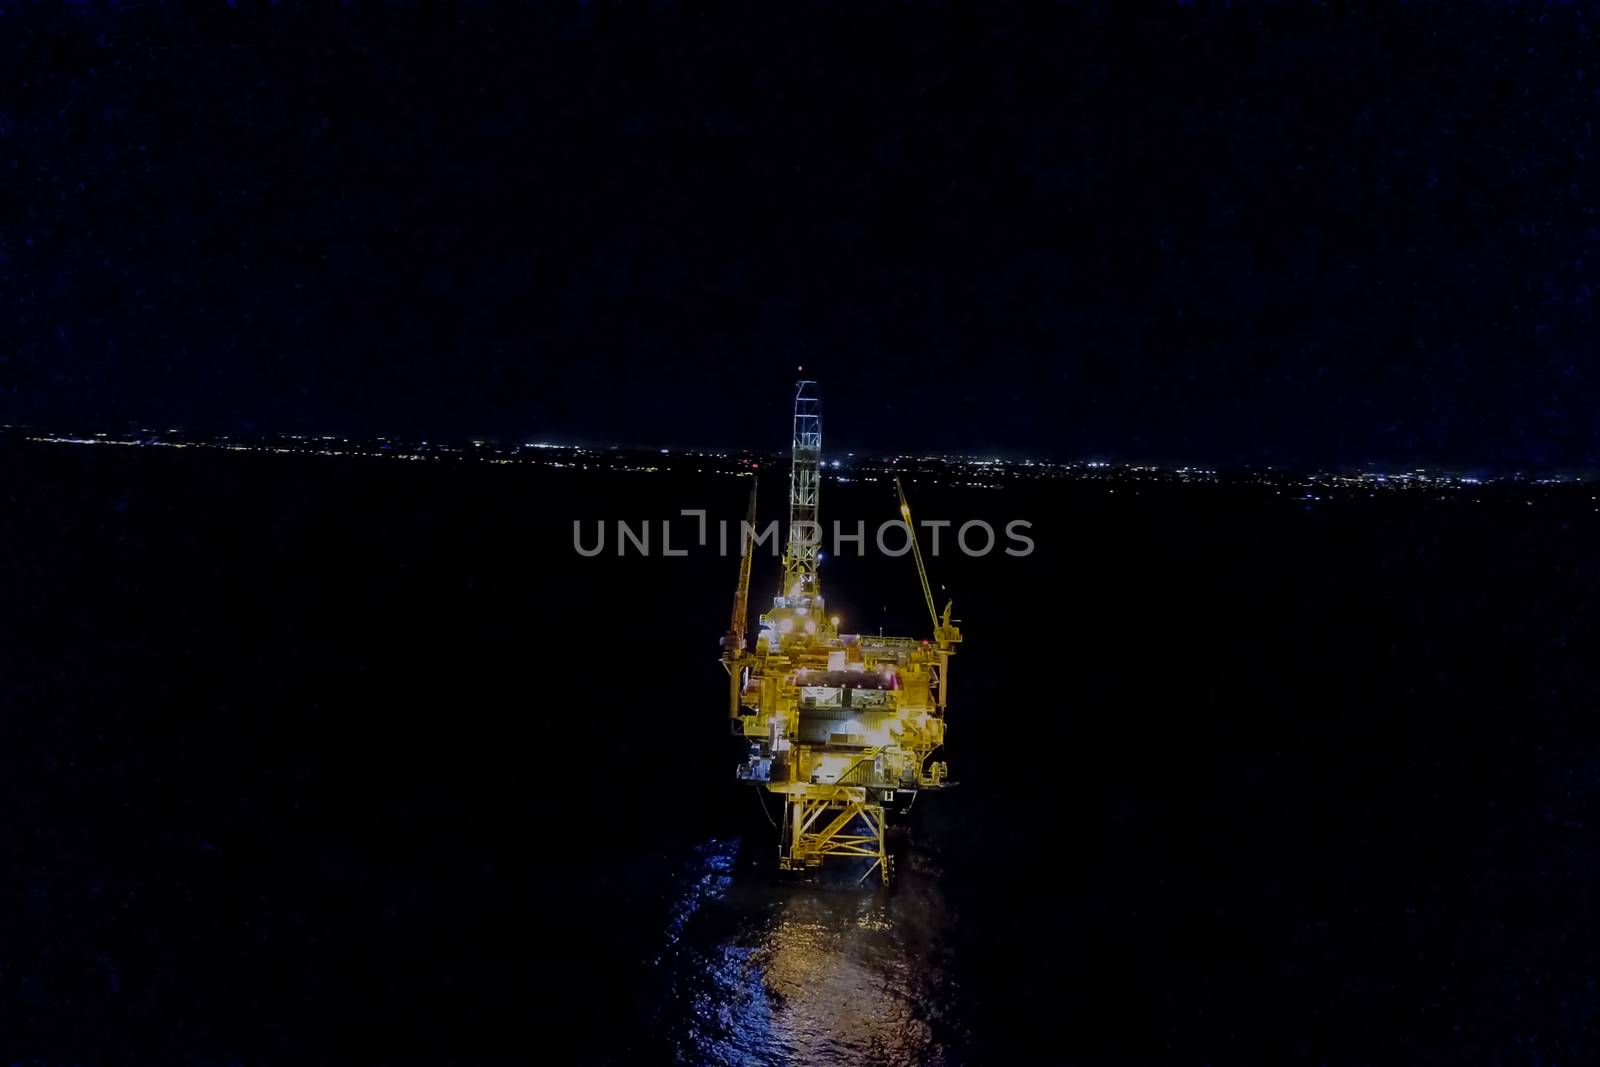 Drilling platform in the port. Oil platform at night in the light of its own lighting. Towing of the oil platform.